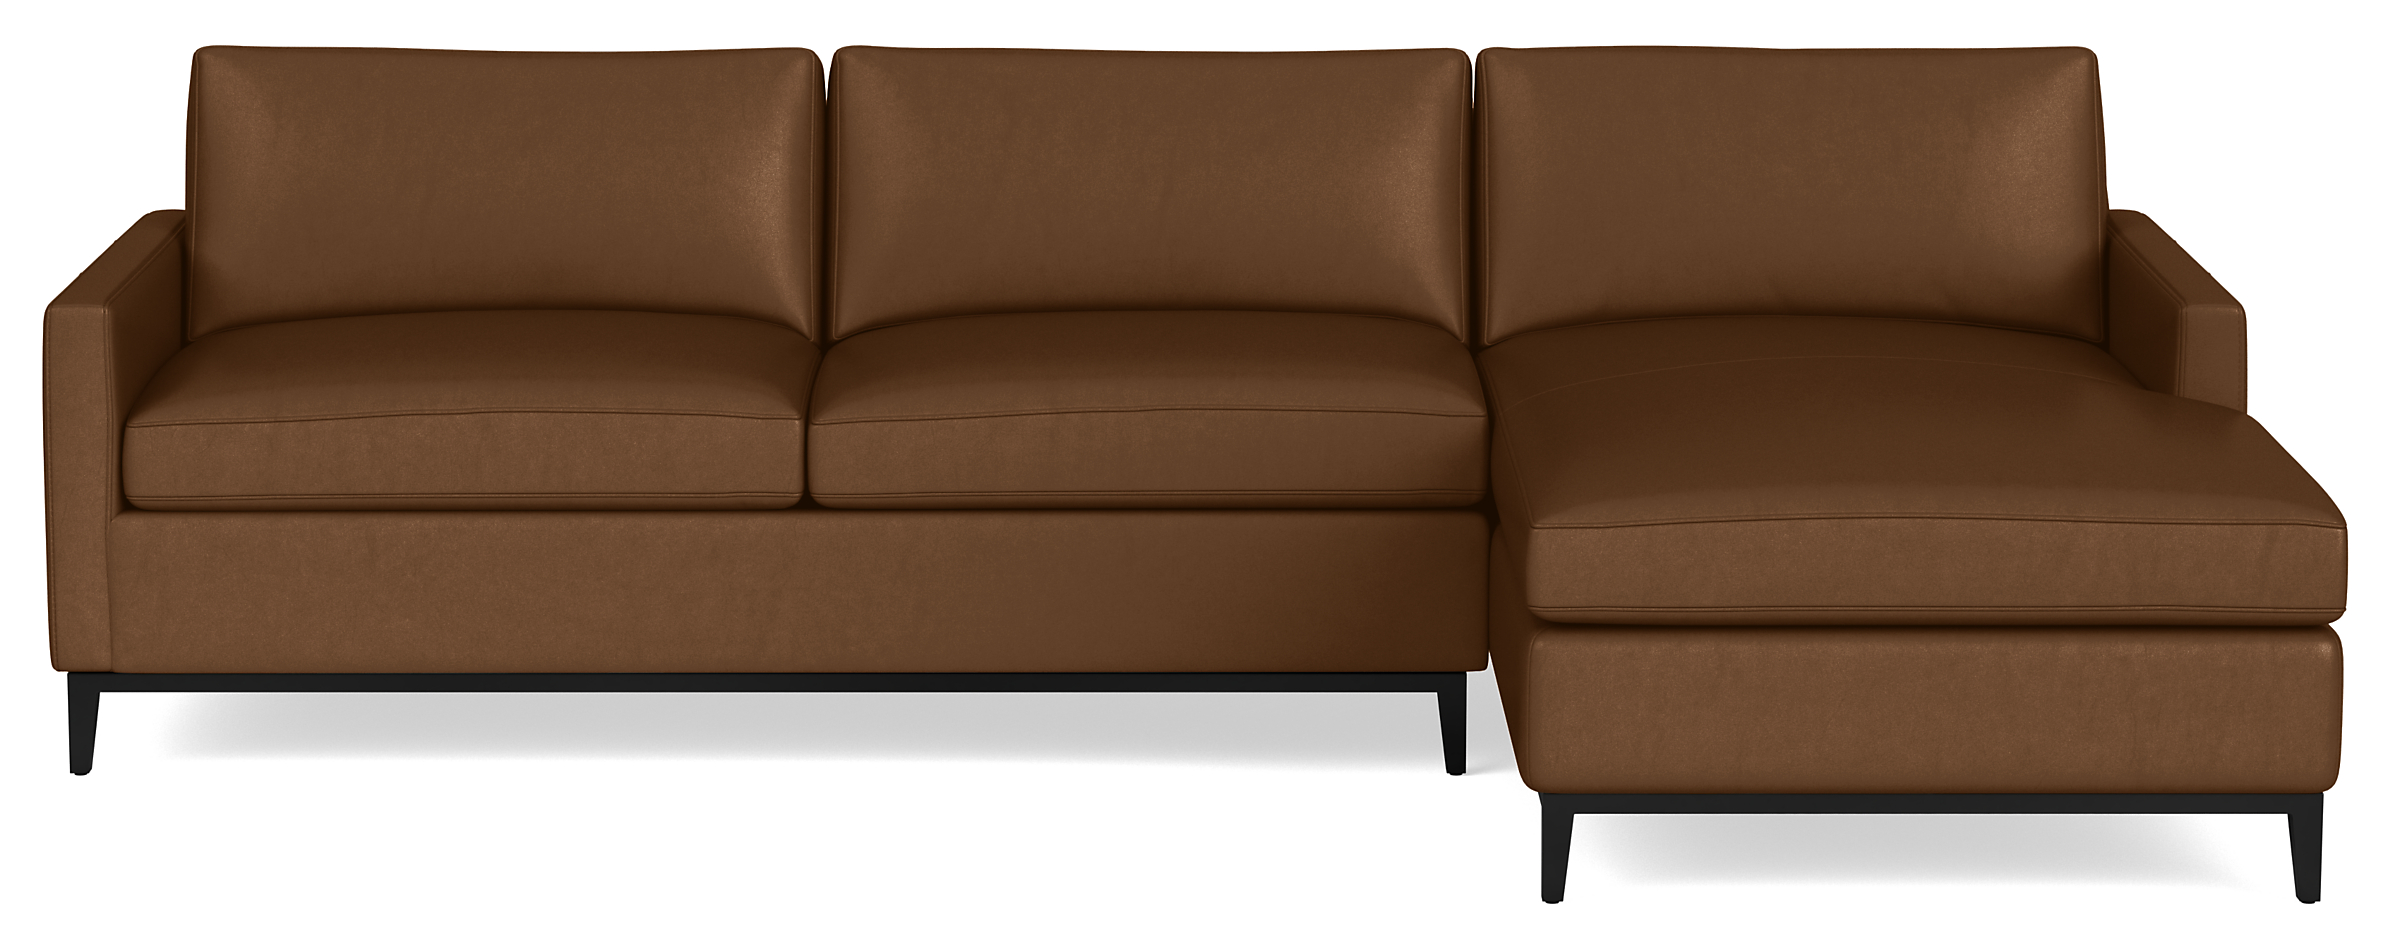 Robin Leather Sofas with Chaise